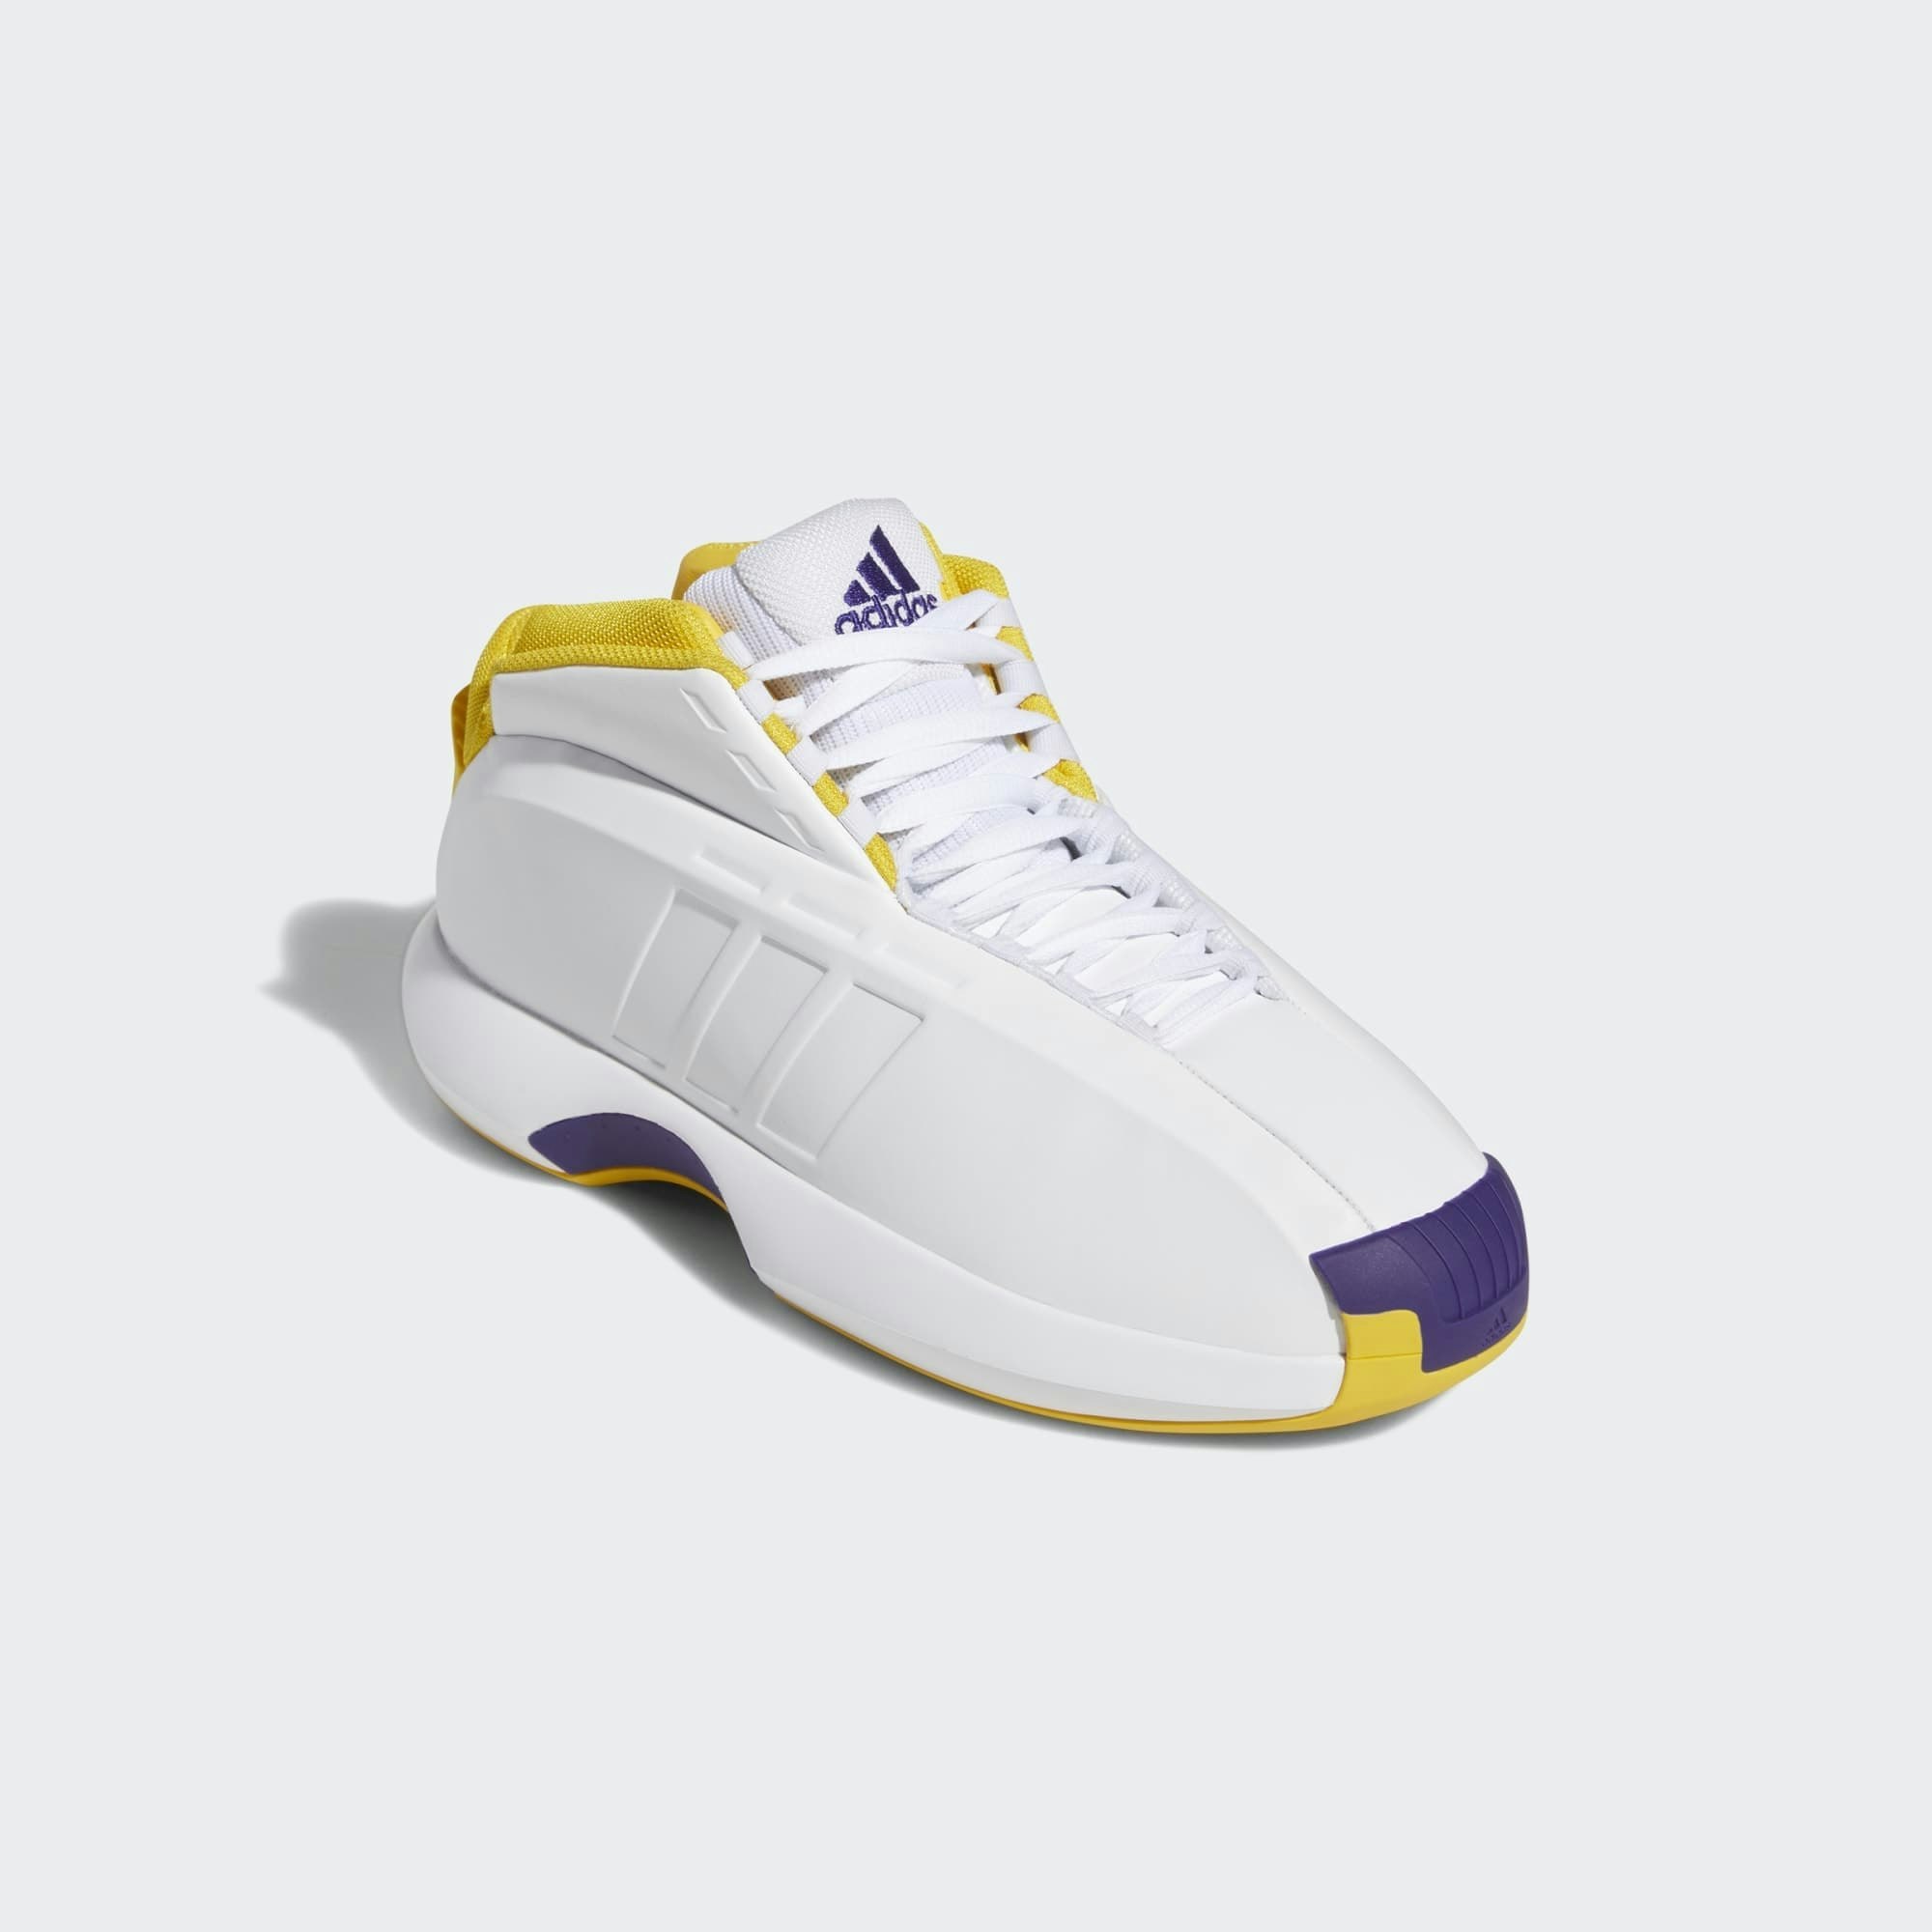 adidas Crazy 1 "Lakers Home"